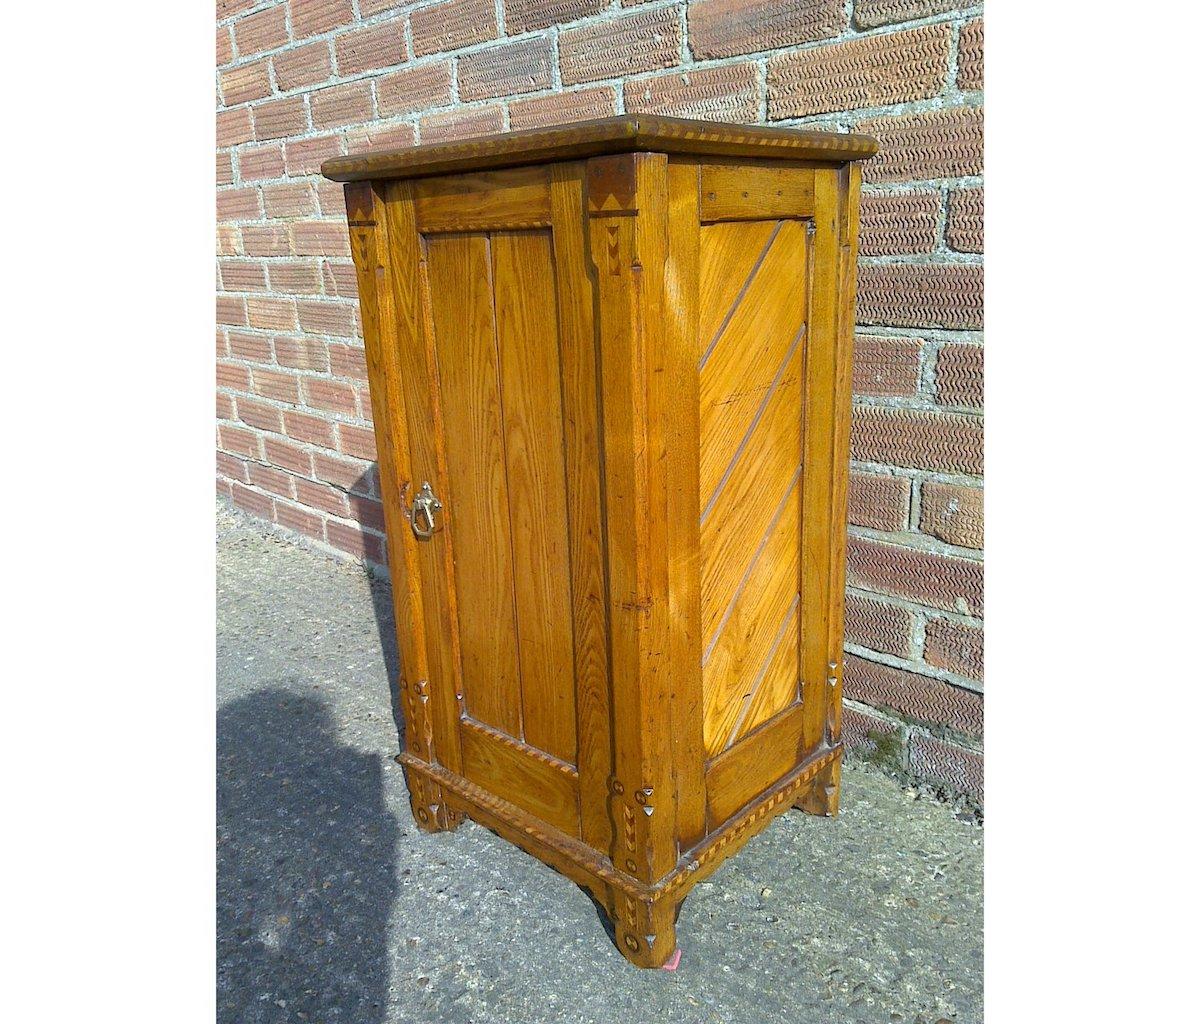 Charles Bevan In the style of.
A Gothic Revival oak bedside cupboard with chevron inlaid details throughout and 45 degree planking to the sides.